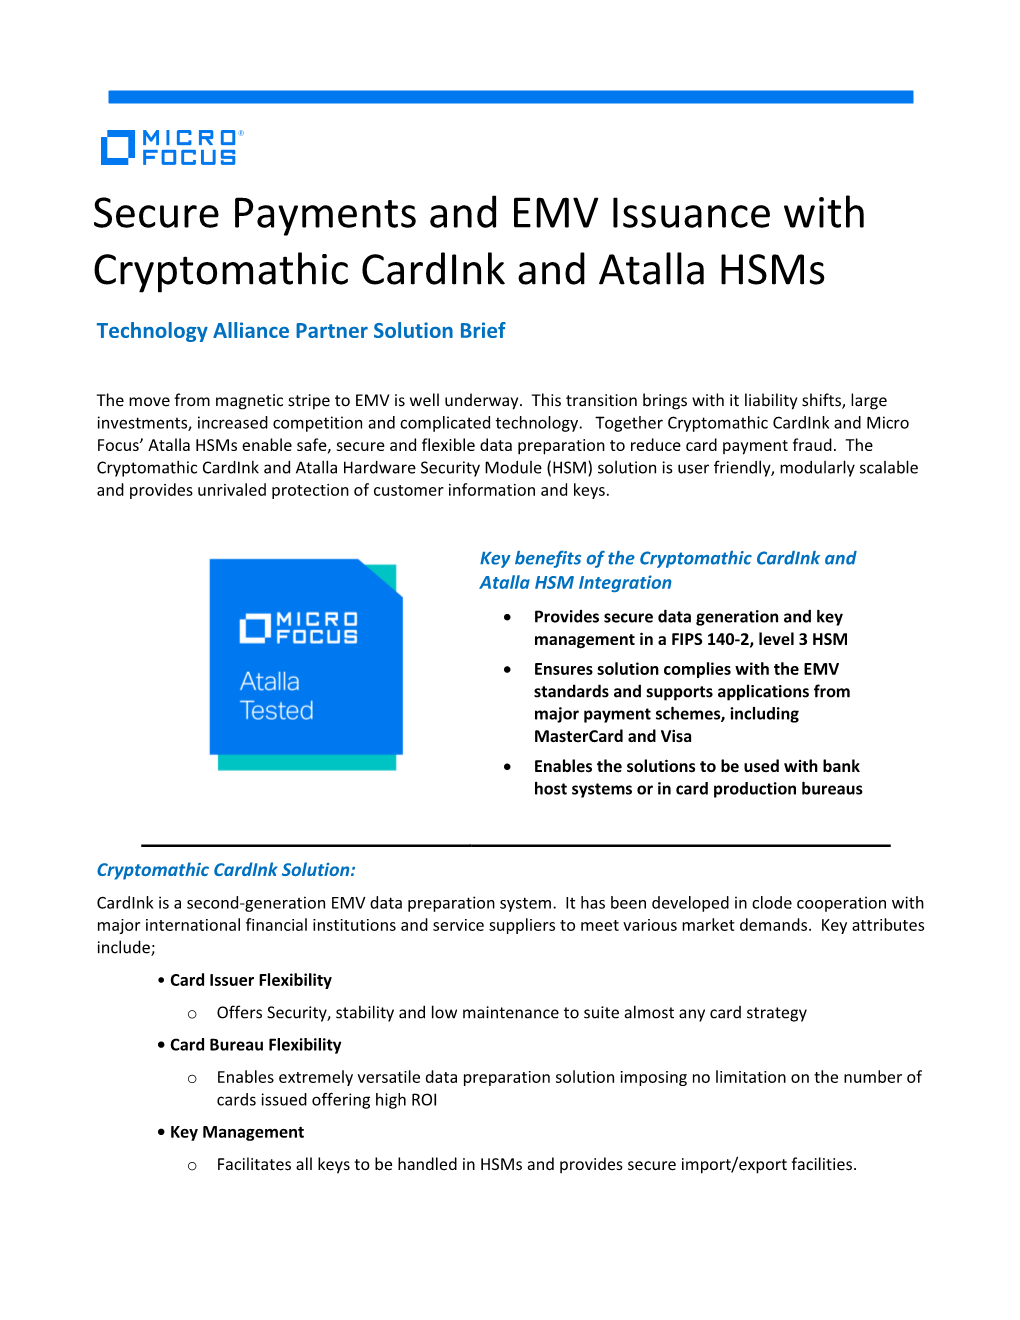 Secure Payments and EMV Issuance with Cryptomathic Cardink And